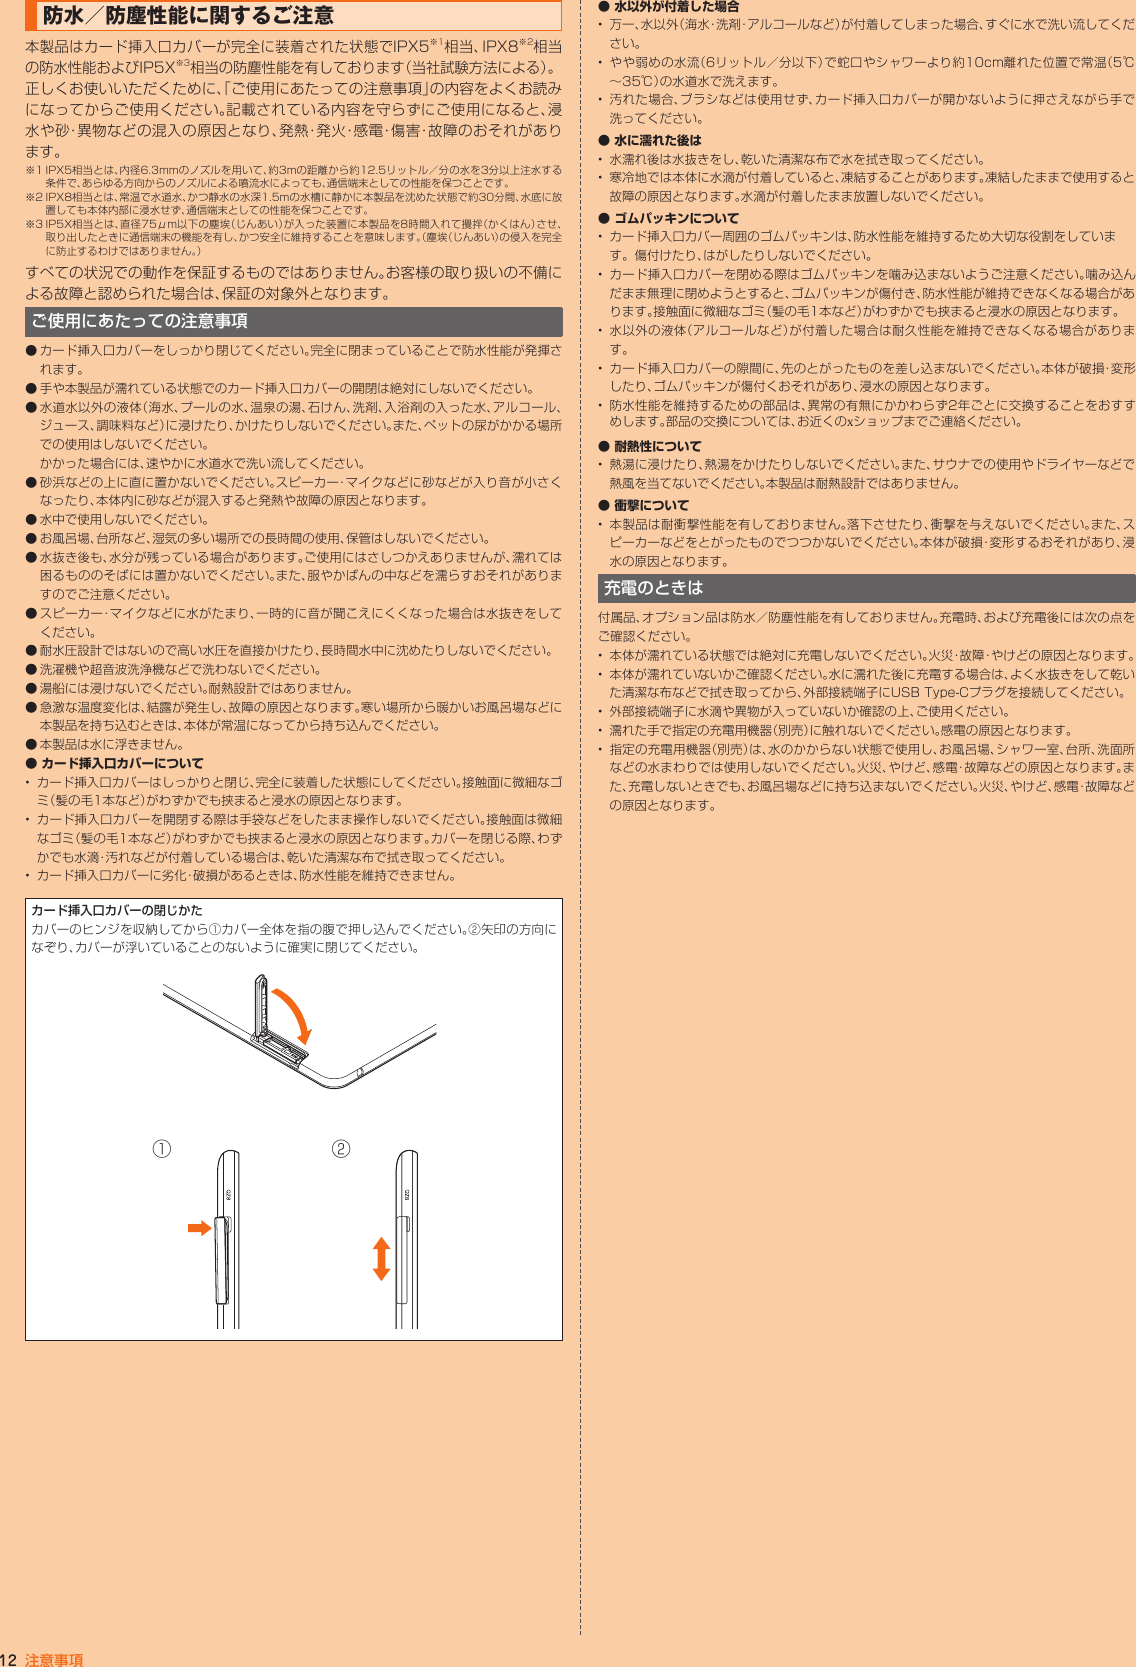 Page 12 of Kyocera FA51 Tablet User Manual part 2